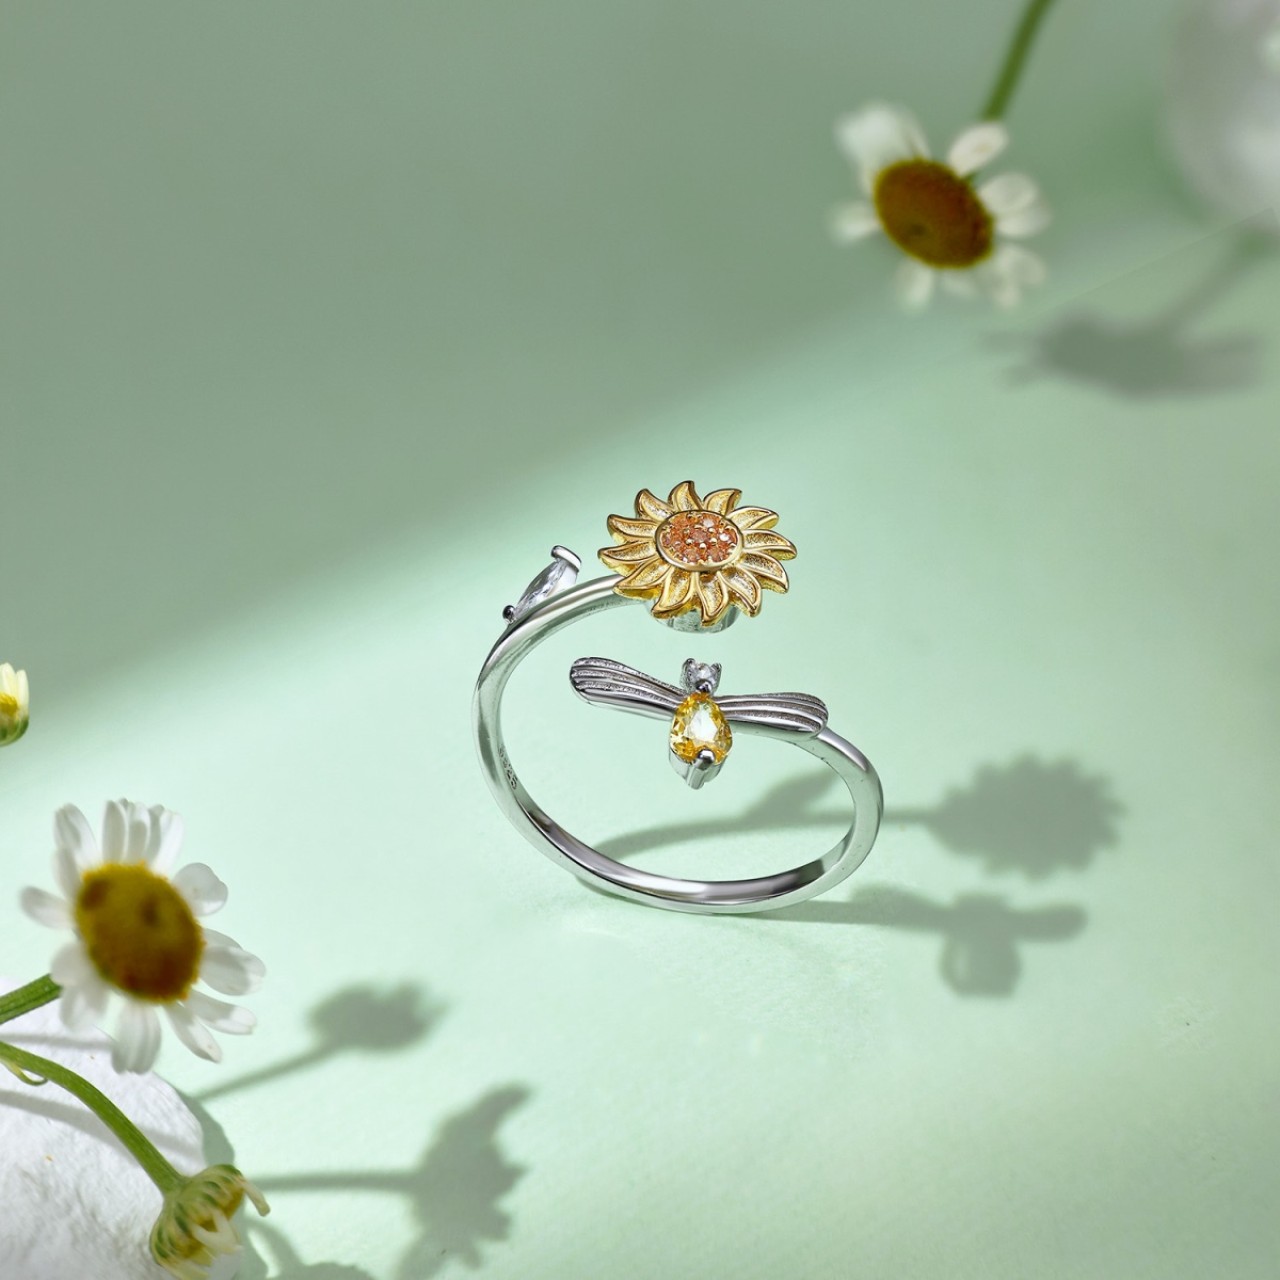 S925 sterling silver sunflower open adjustable ring